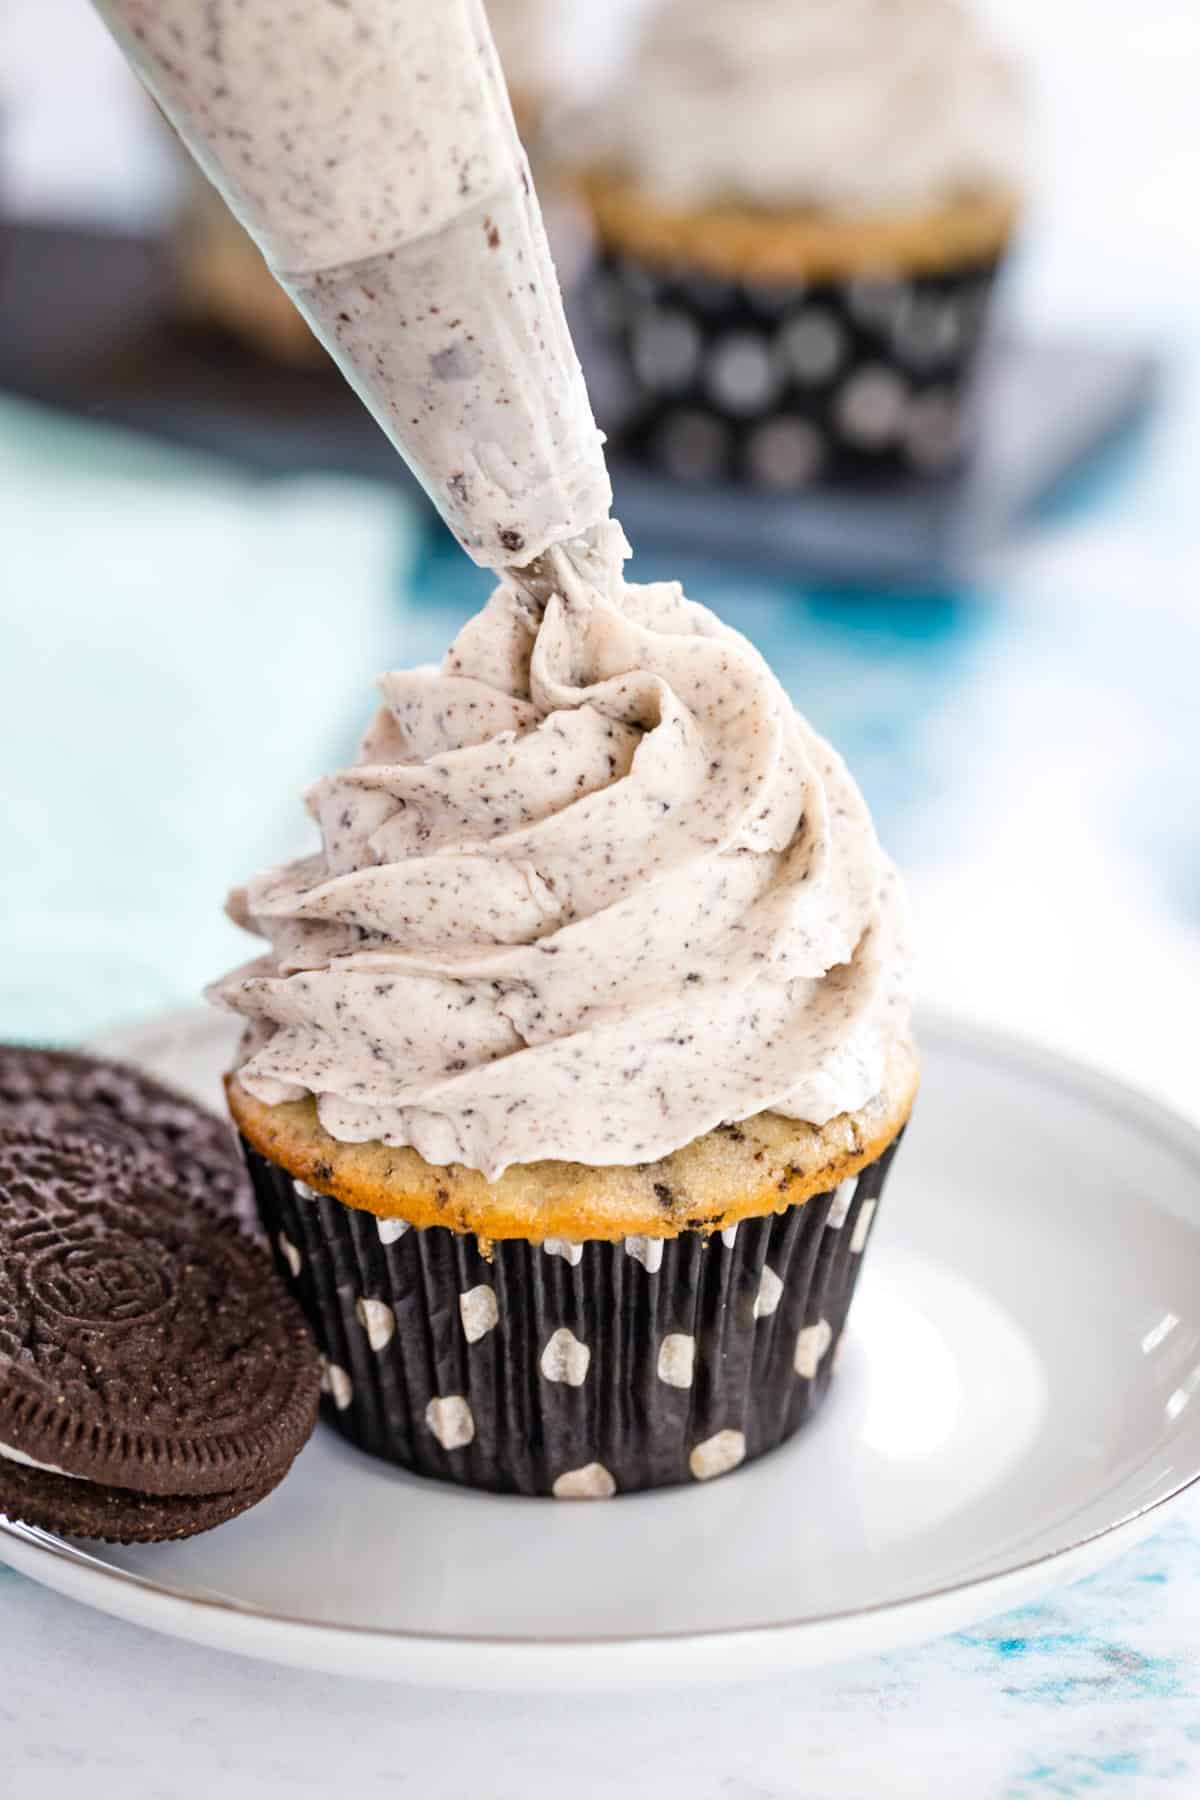 cookies and cream frosting bring piped out of a pastry bag into a swirl on an oreo cupcake sitting on a plate next to two gluten free oreos